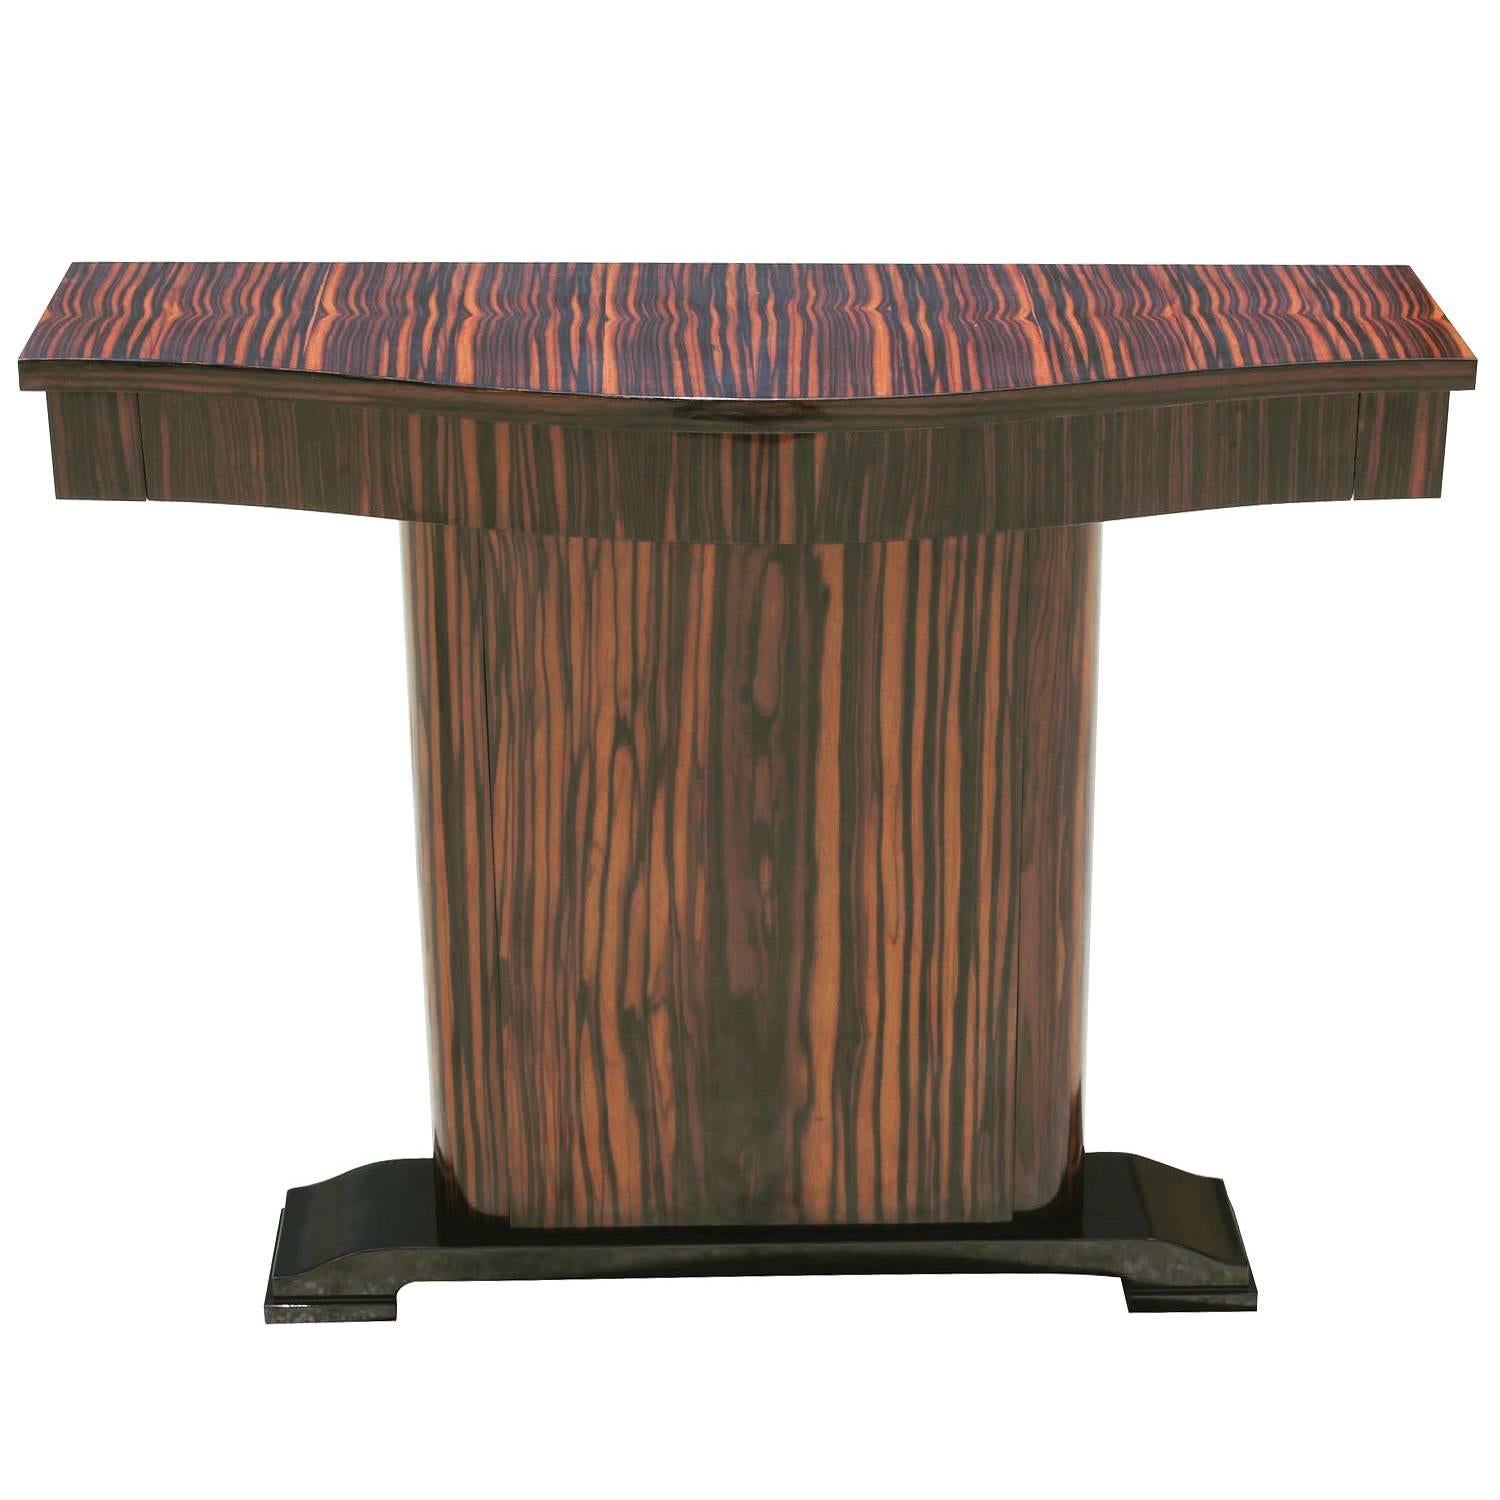 Gorgeous French Art Deco Exotic Macassar Ebony Console Table, circa 1940s